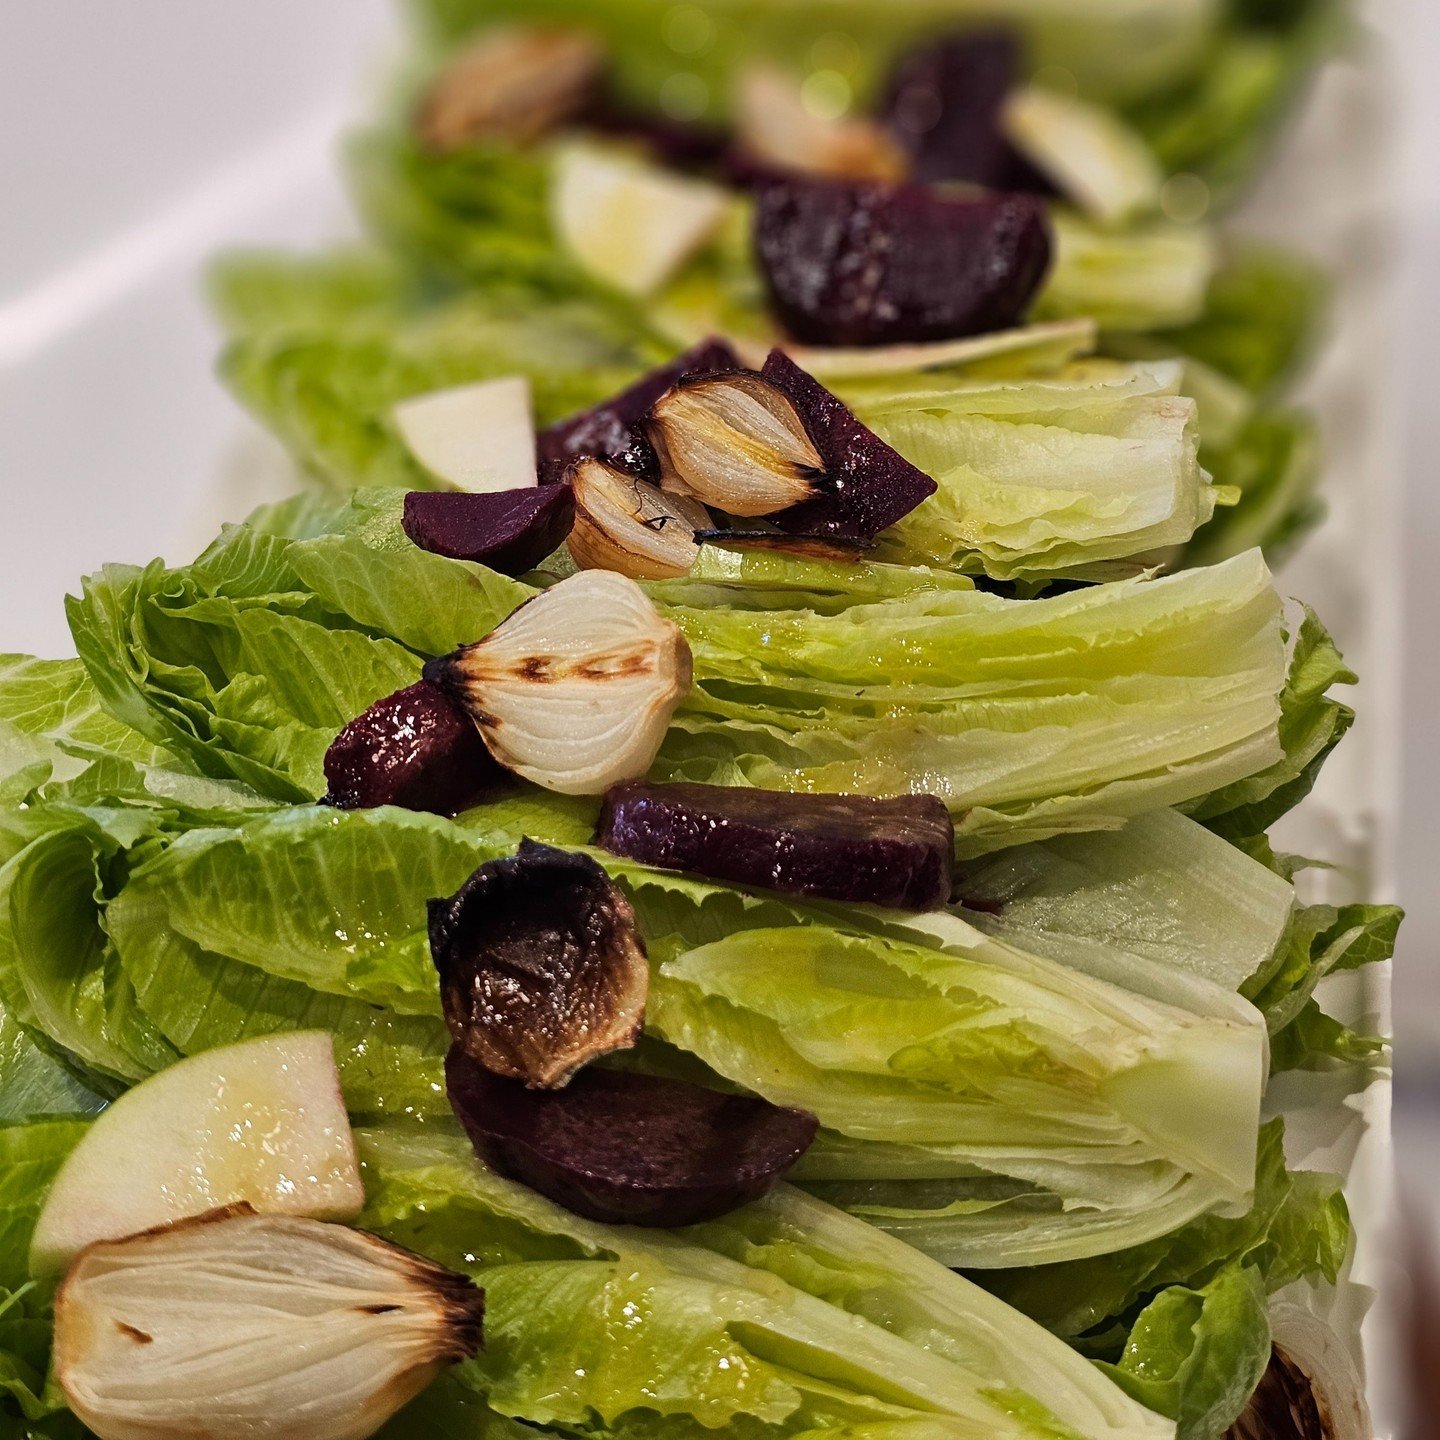 Needing a new salad idea? Try a Caramelized onion, roasted beets, and pear salad!

📱858-405-5372
📍San Diego, CA
💻busybeecookforme.com
.
#busybeesd #catering #personalchef #foodies #sandiego #events #weddings #socal #artisan-food #foodphotography #